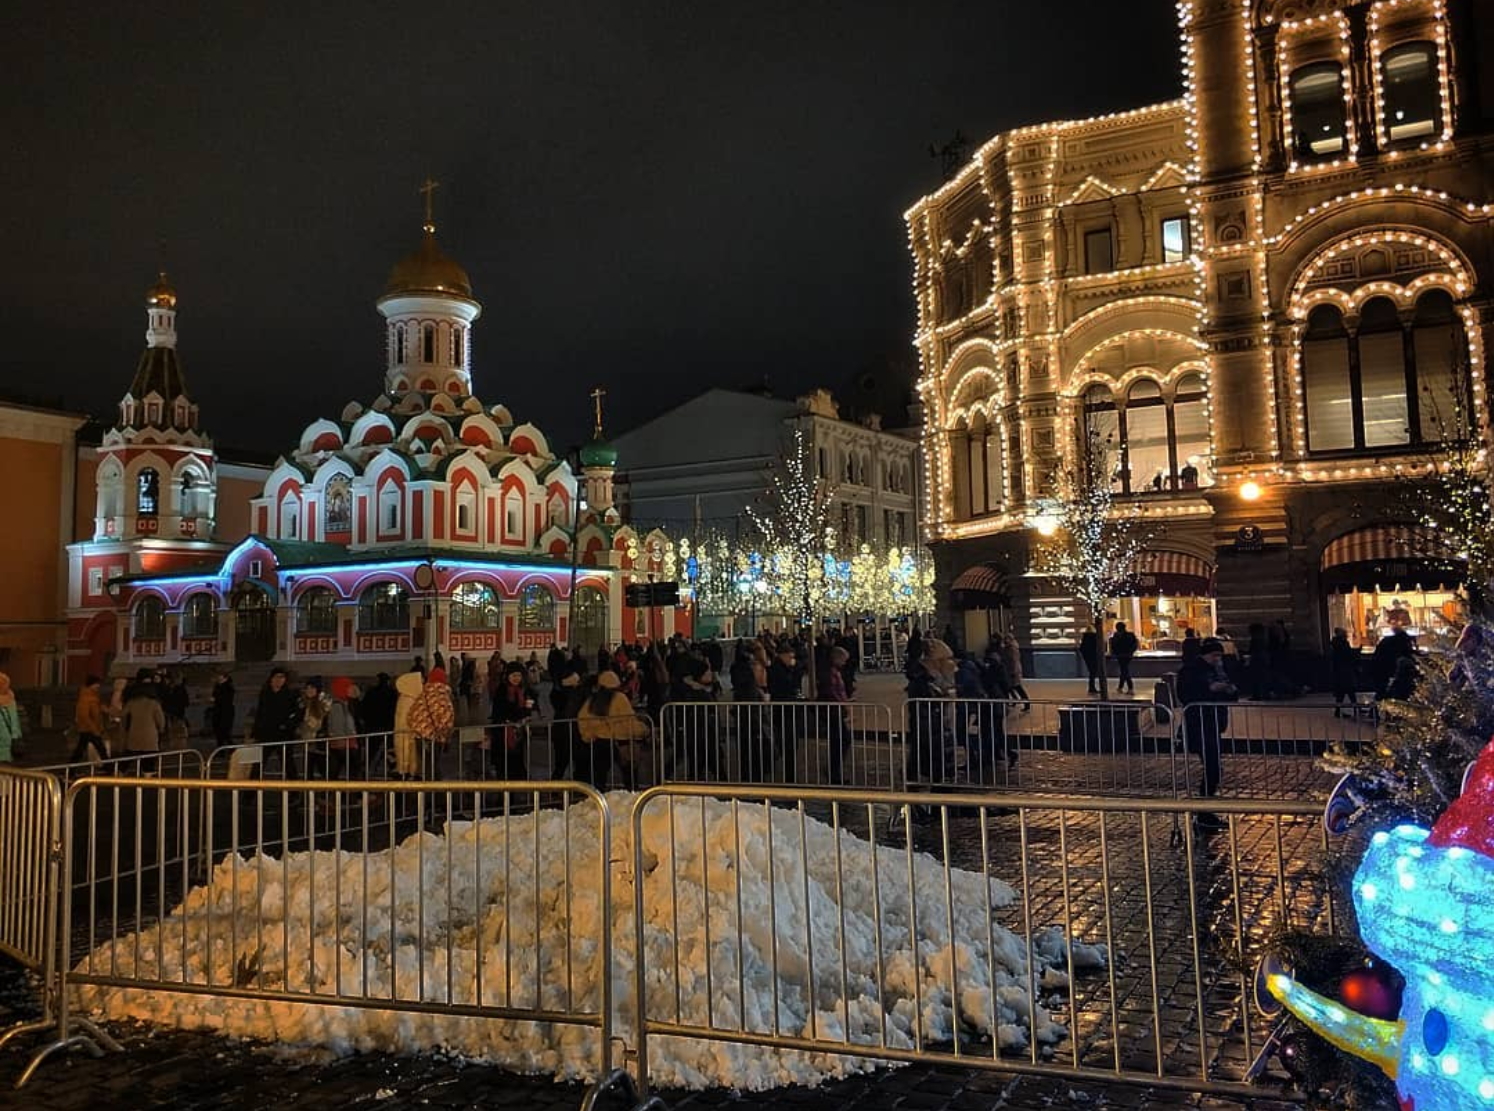 This is all the snow there is in Moscow on 28 December 2019. The snow was trucked in and is being guarded in the Red Square. Photo: mariksa_10 / Instagram